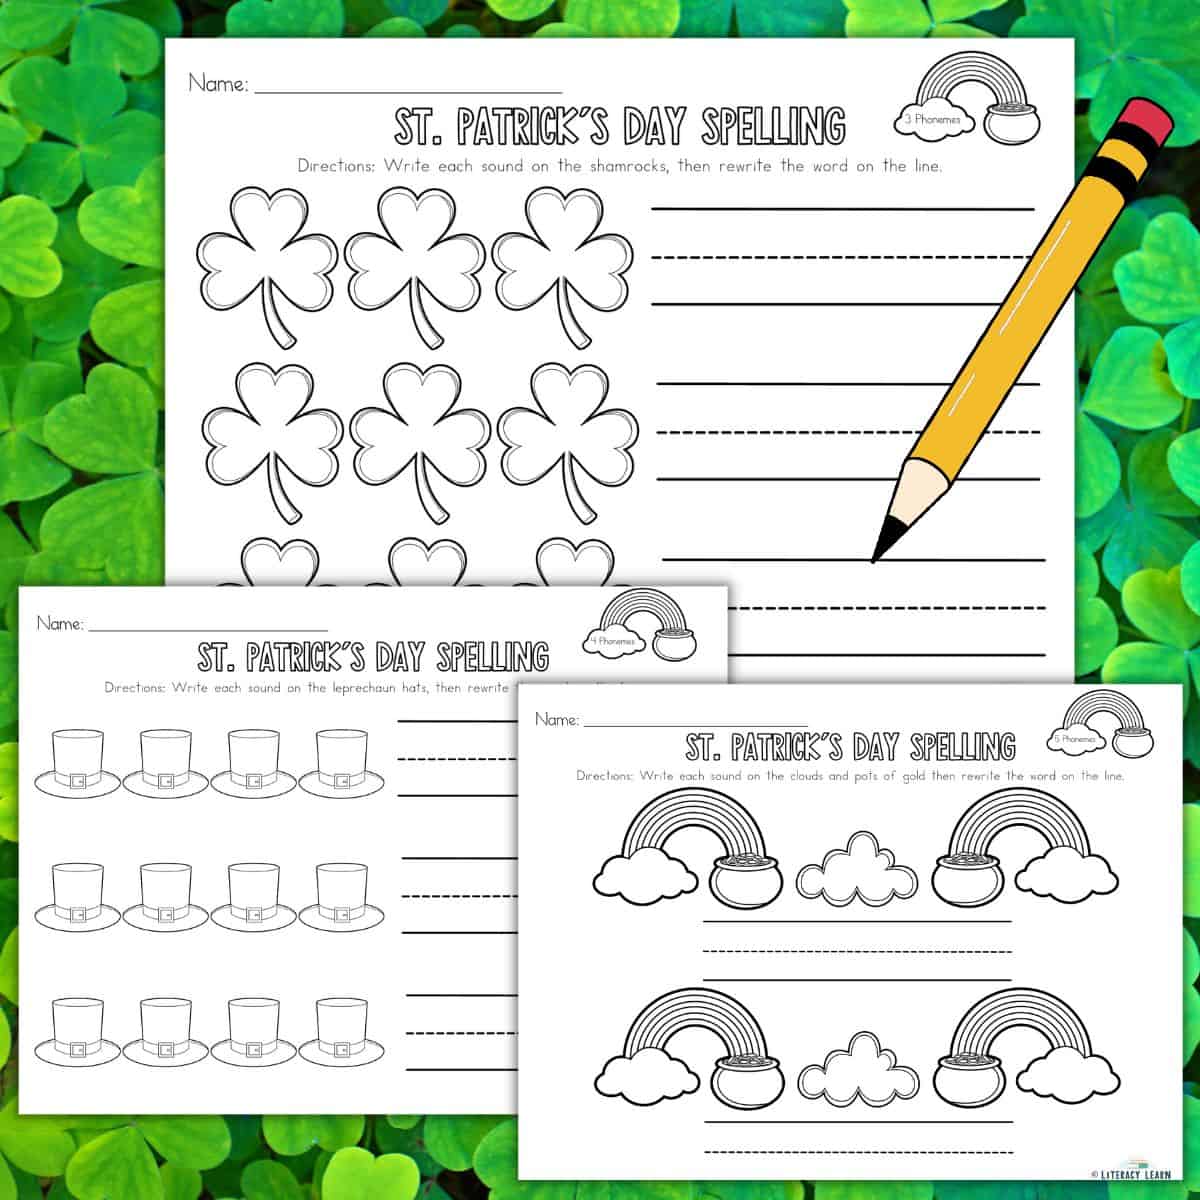 Colorful graphic with three St. Patrick's Day word mapping worksheets and a pencil. 